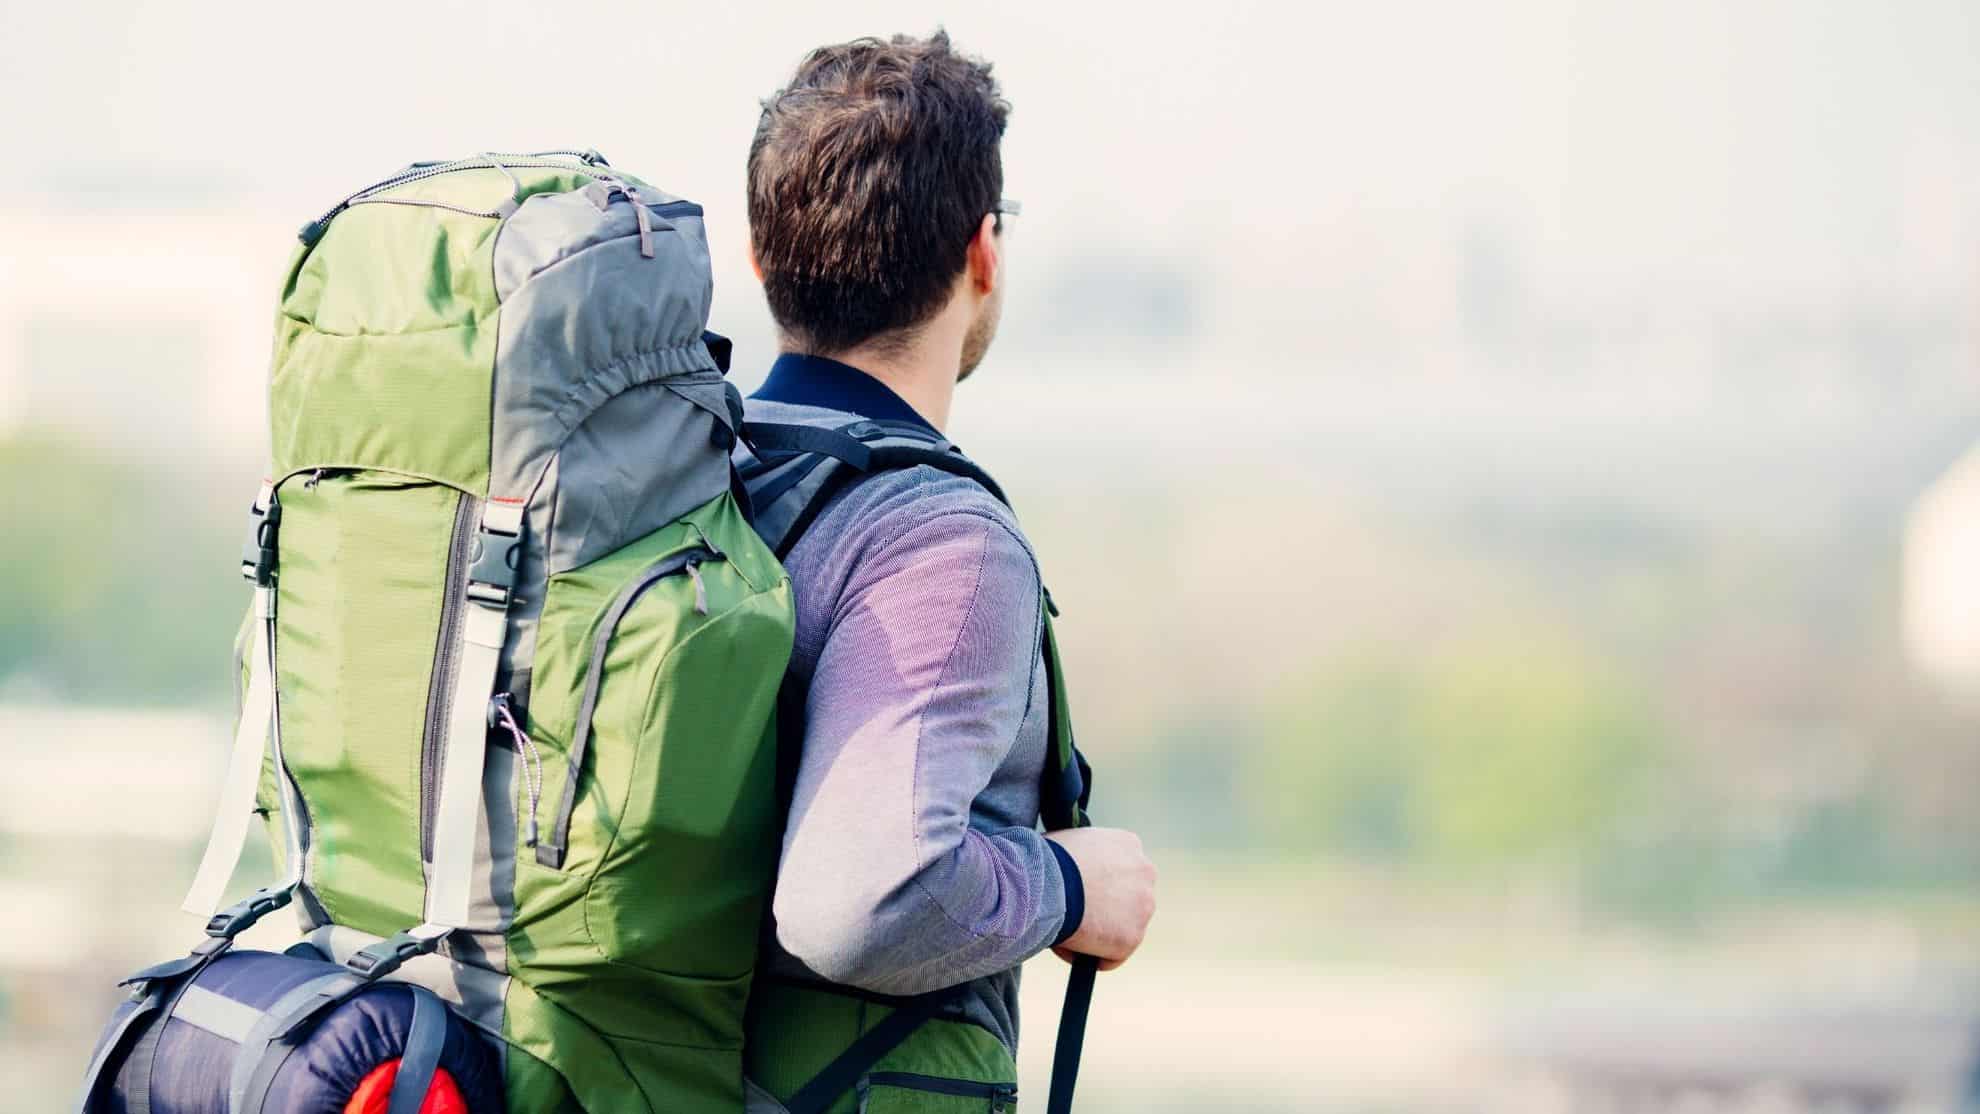 Higher PAYG Withholding Rates Continue to Apply To Backpackers